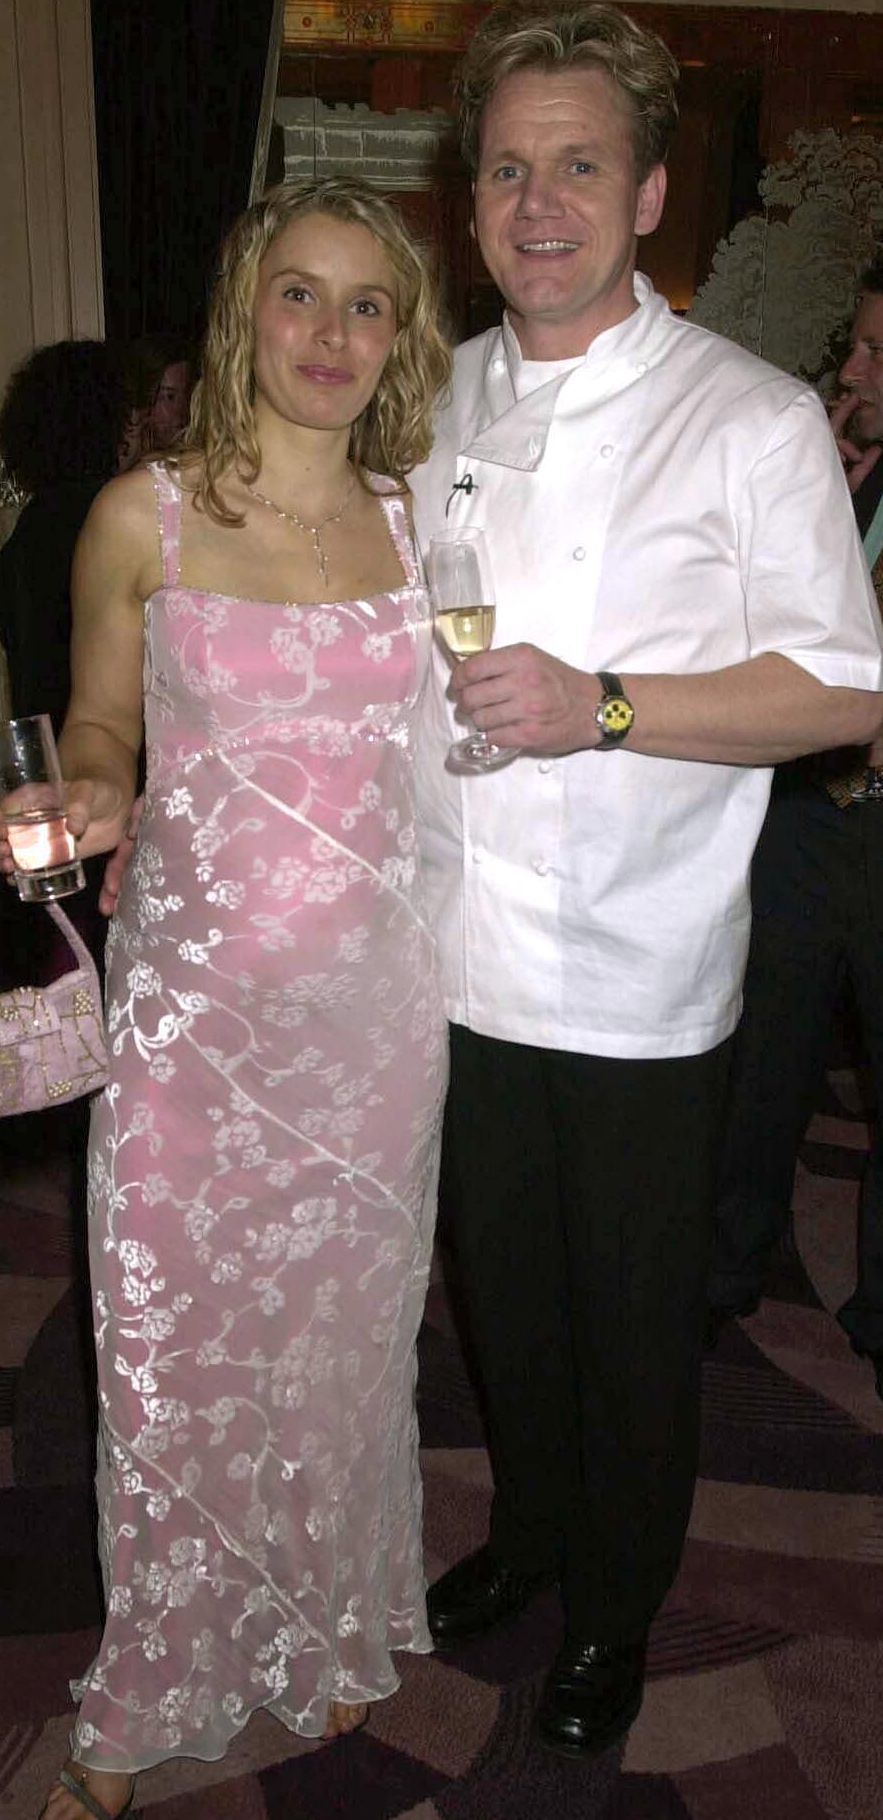 Gordon Ramsey with his pregnant wife Tana in a pink dress